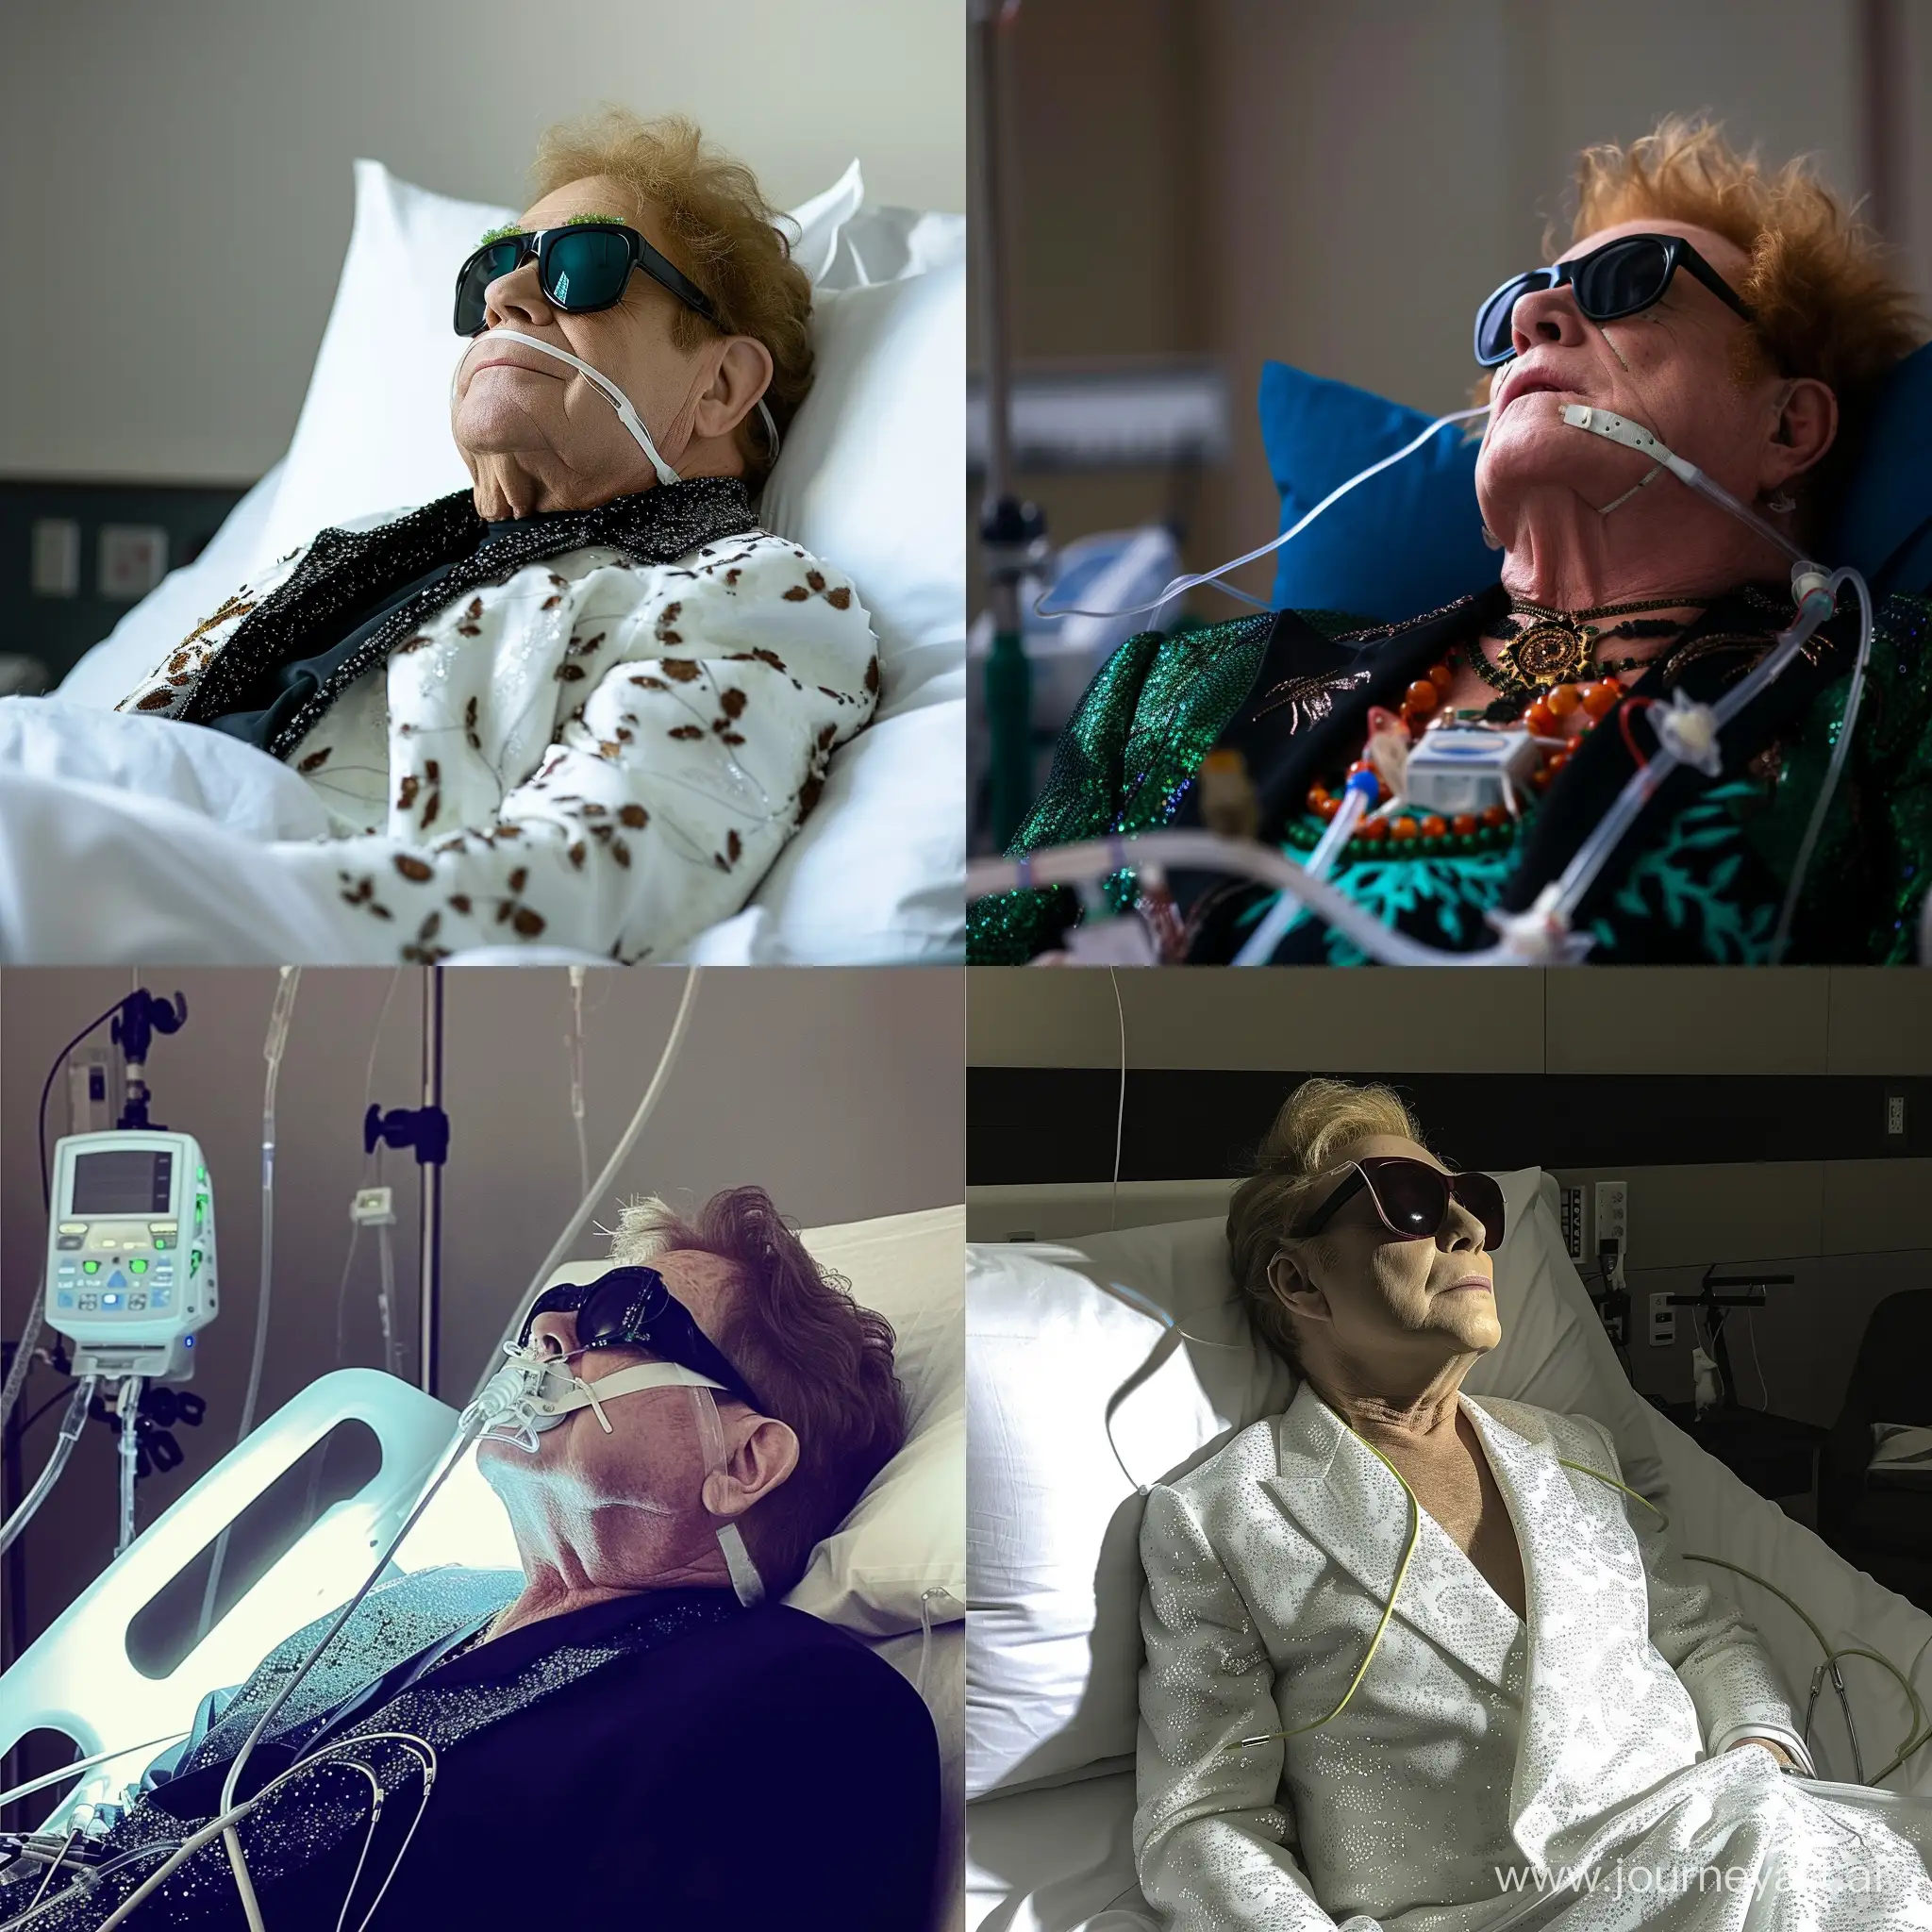 Elton John is in the hospital, hooked up to a ventilator, detailed.